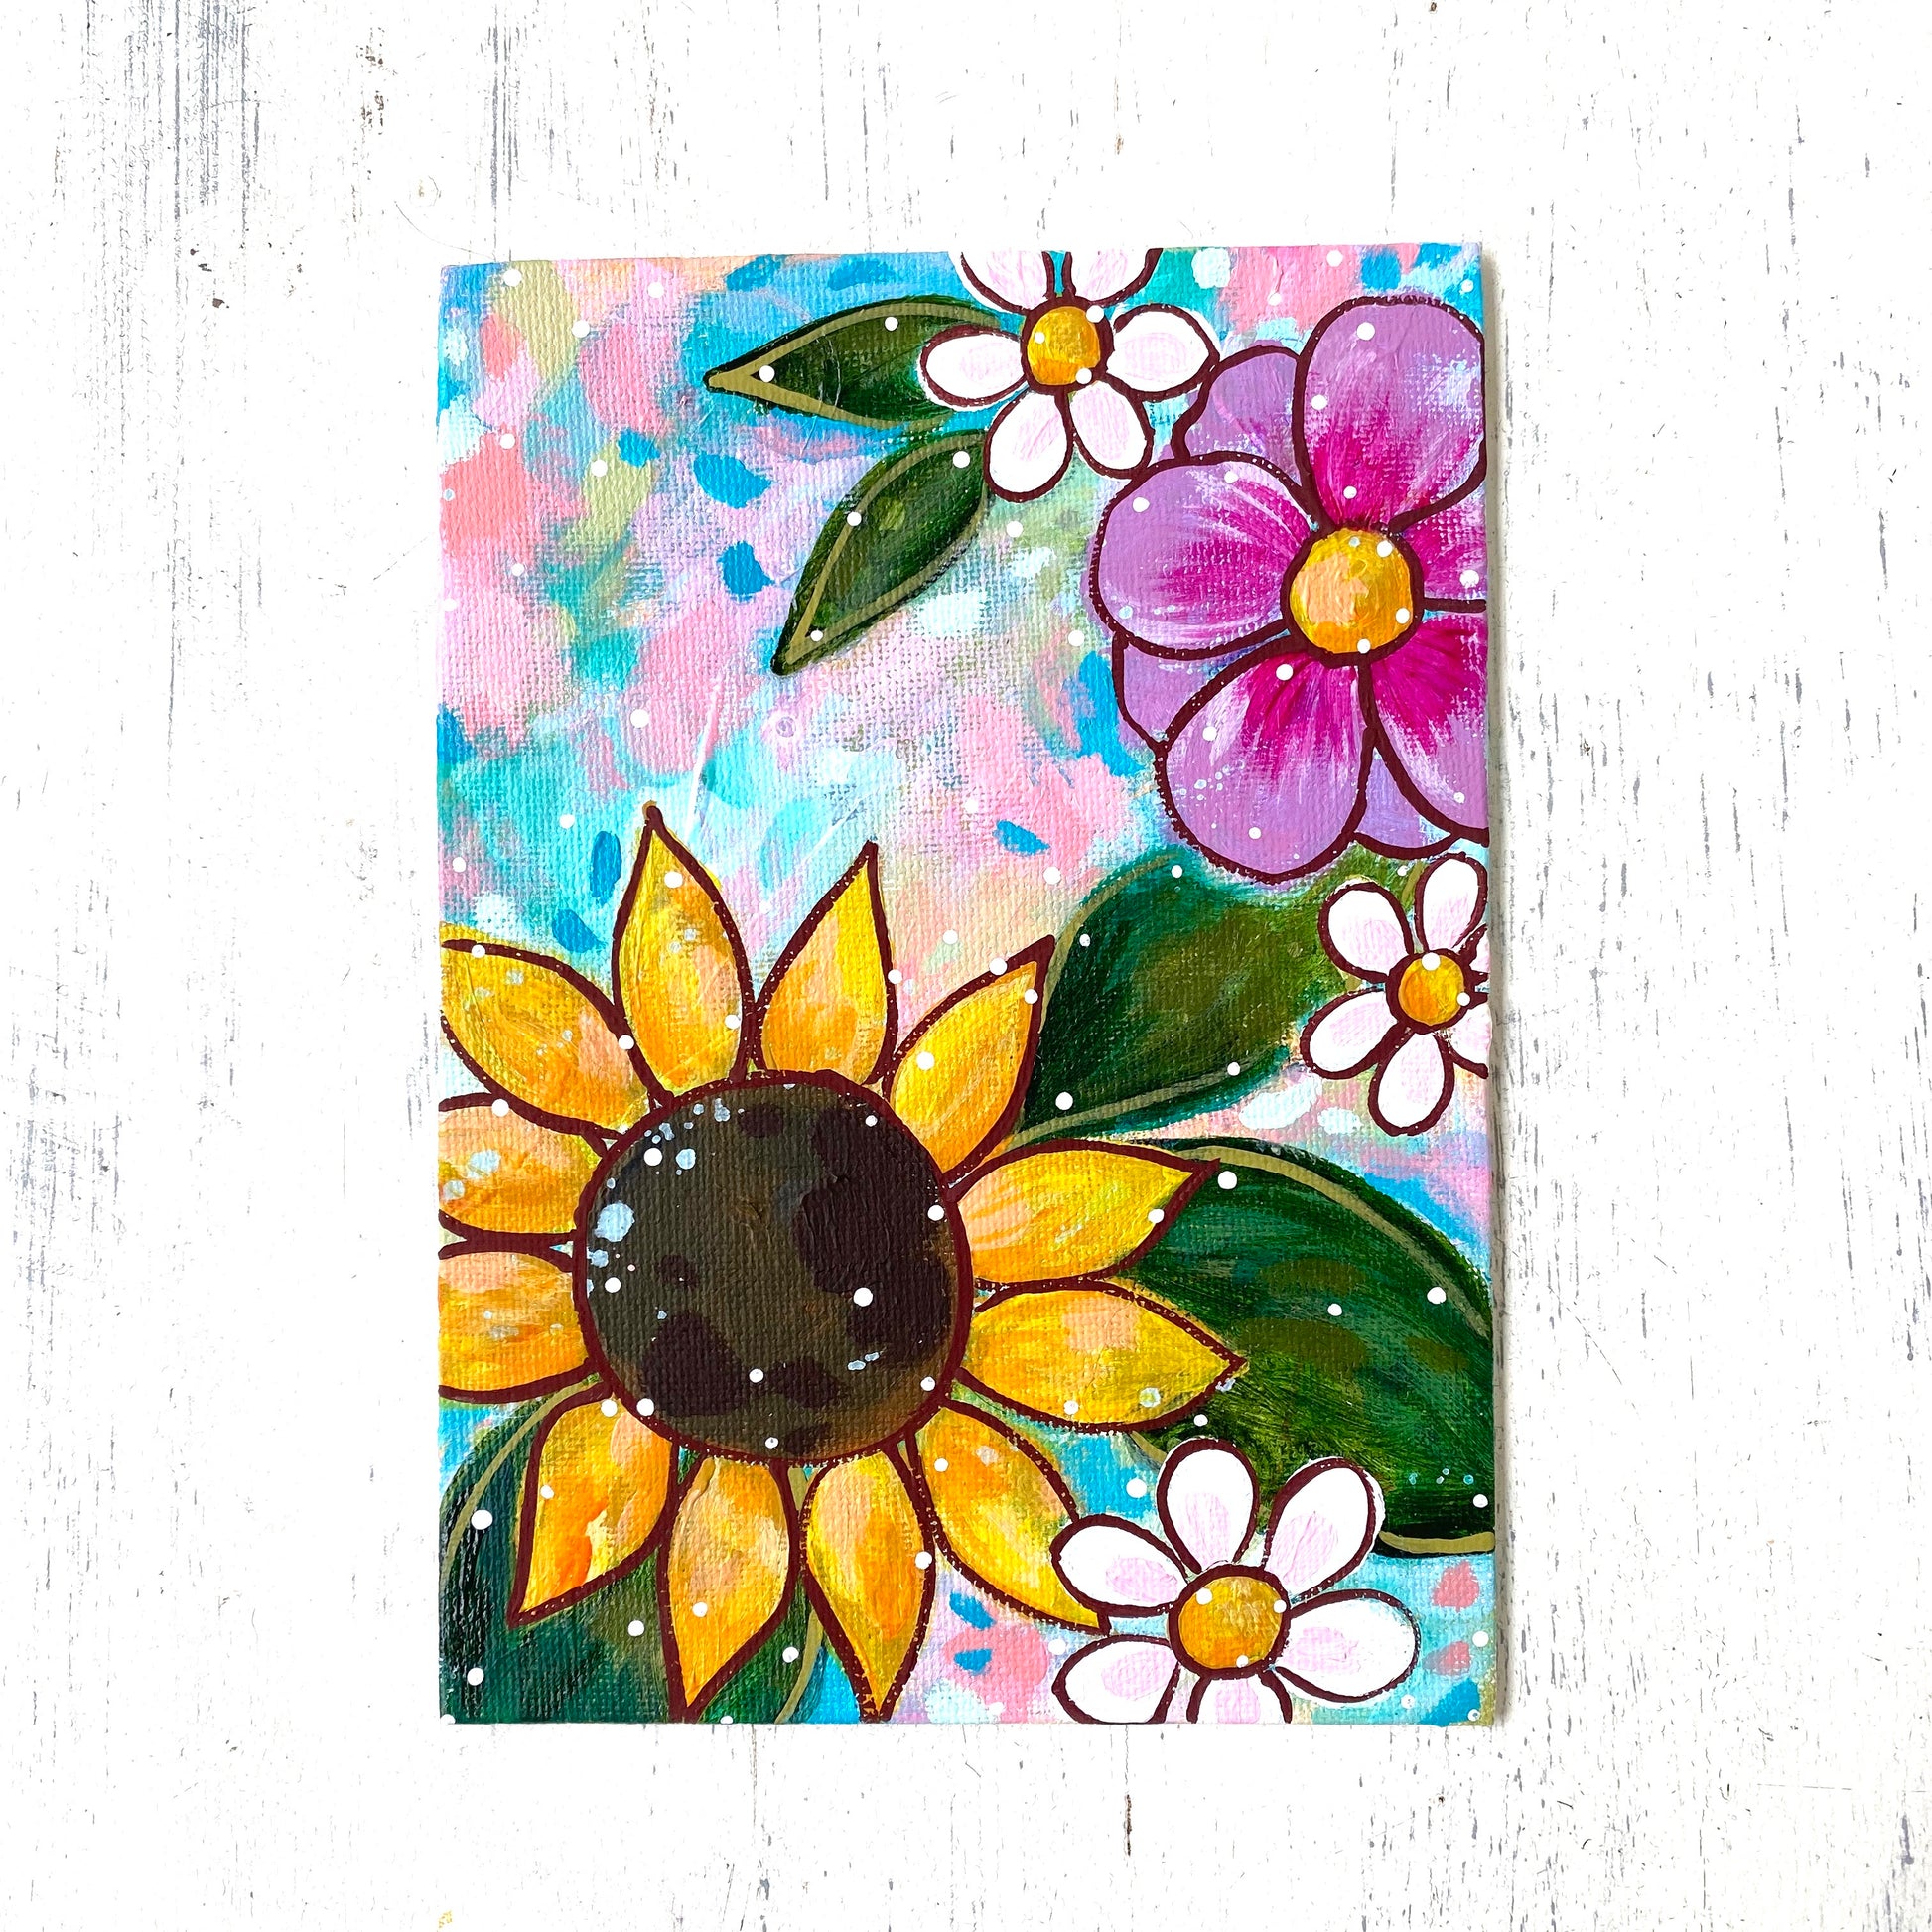 January Daily Painting Day 27 “Add a Little Sunshine” 5x7 inch Floral Original - Bethany Joy Art